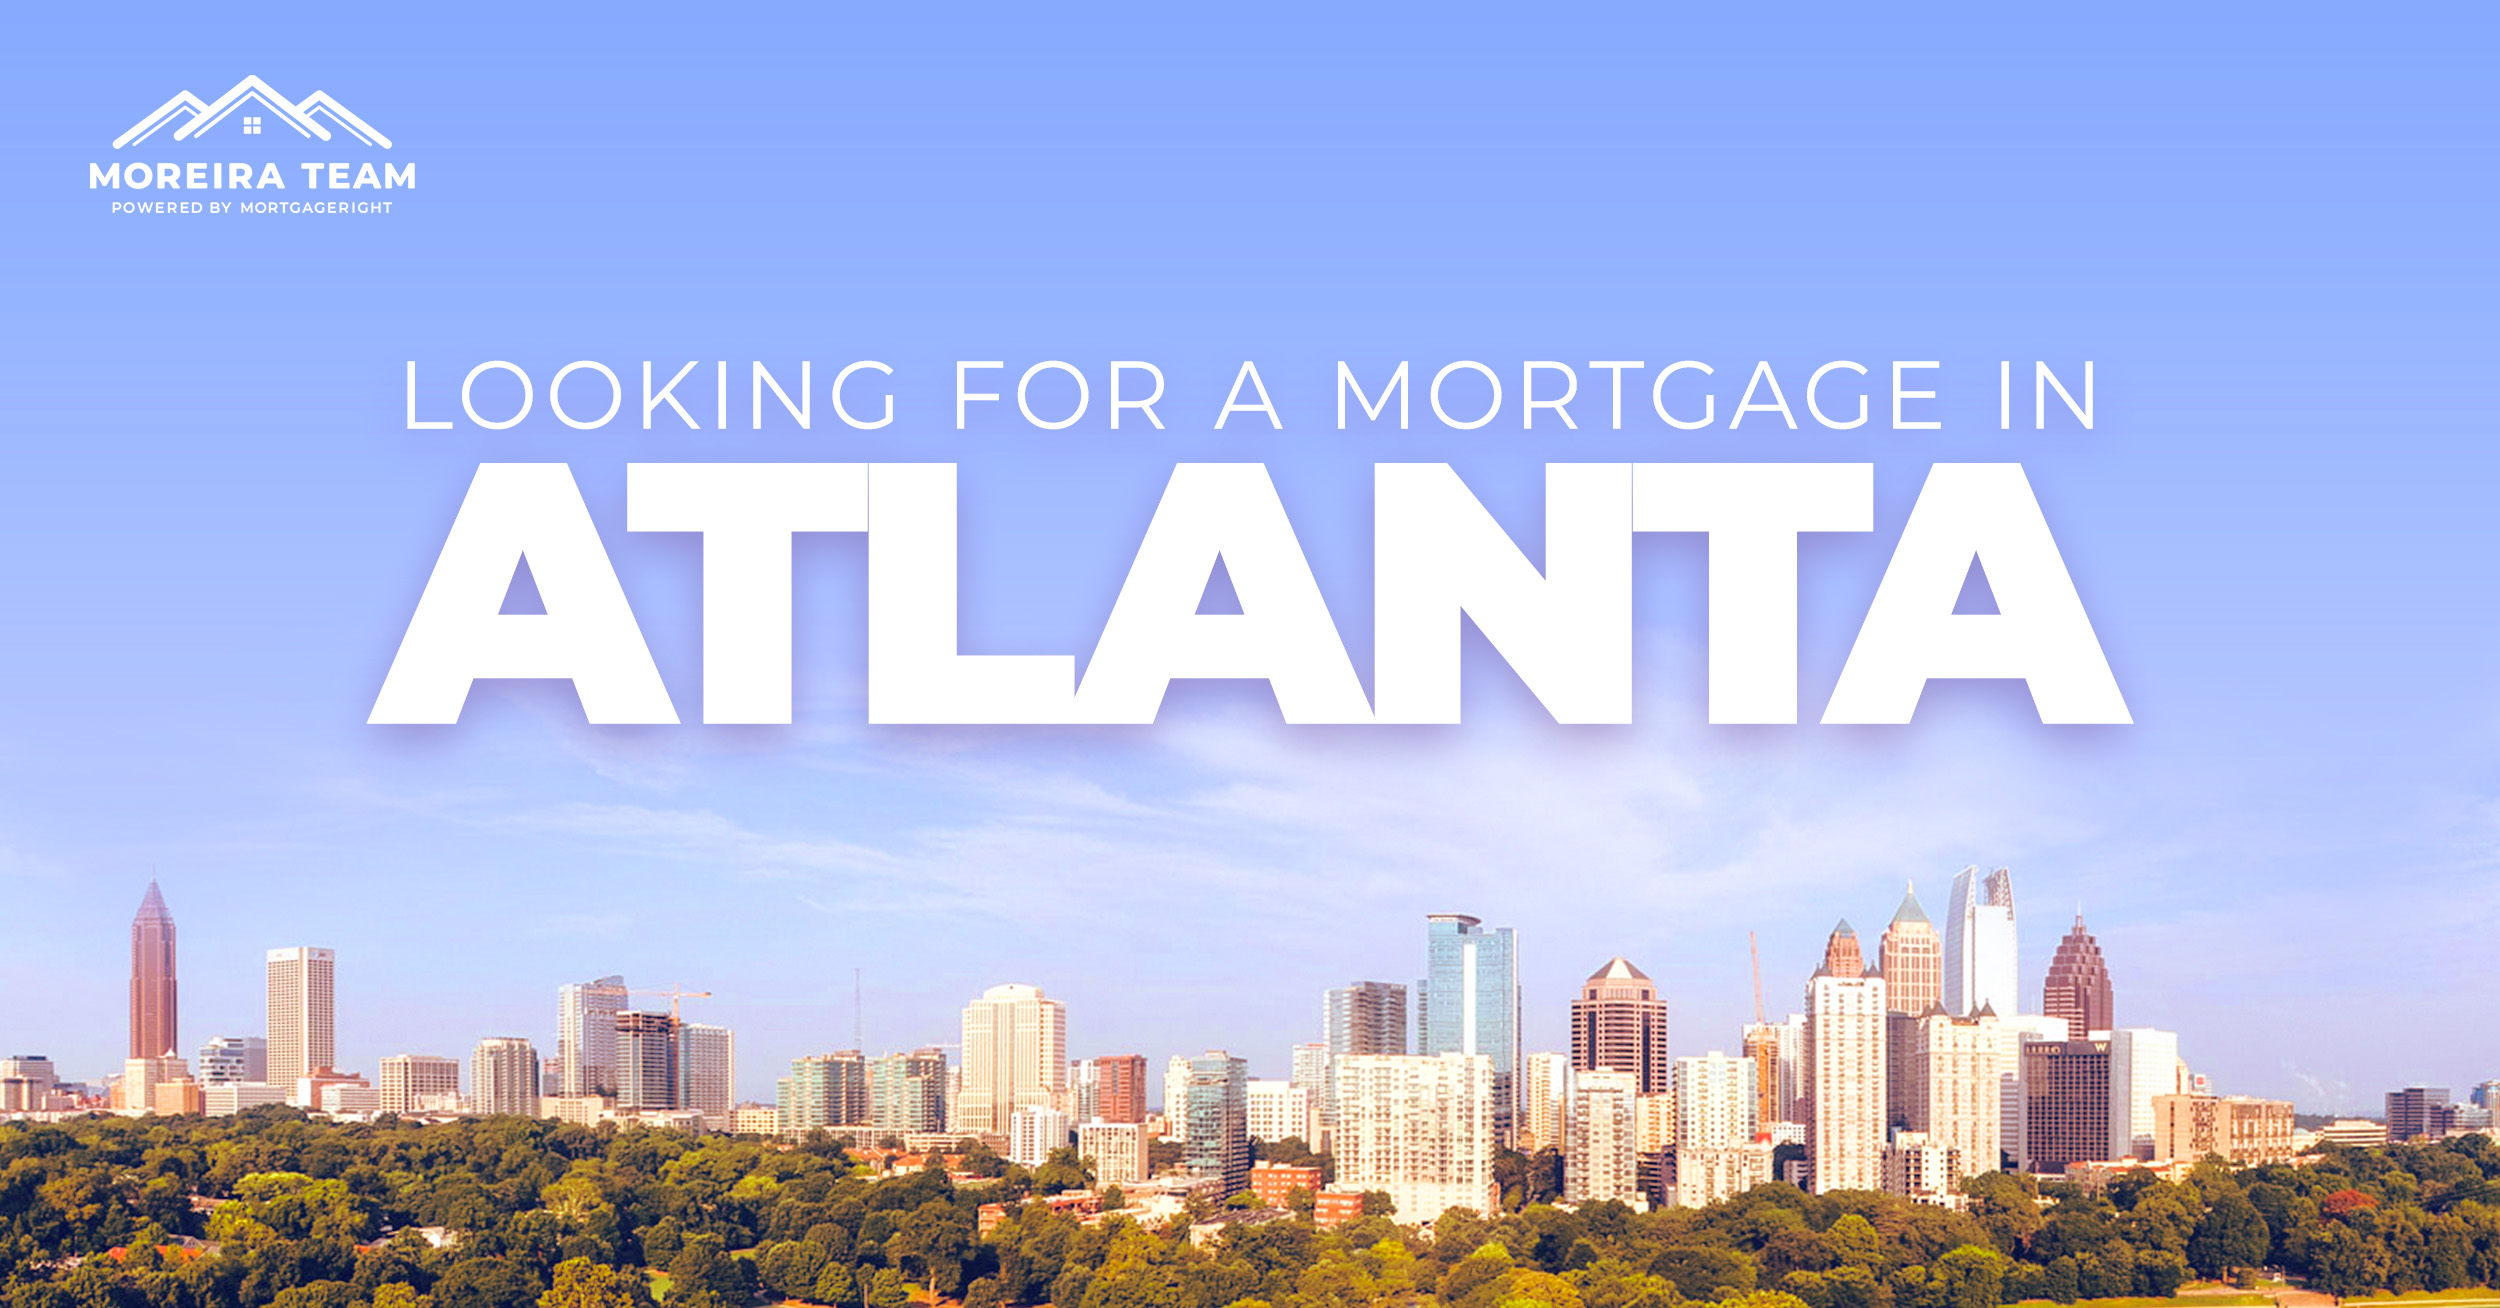 Find the Best Mortgage Brokers in Atlanta – Compare Rates & 5 Star Reviews